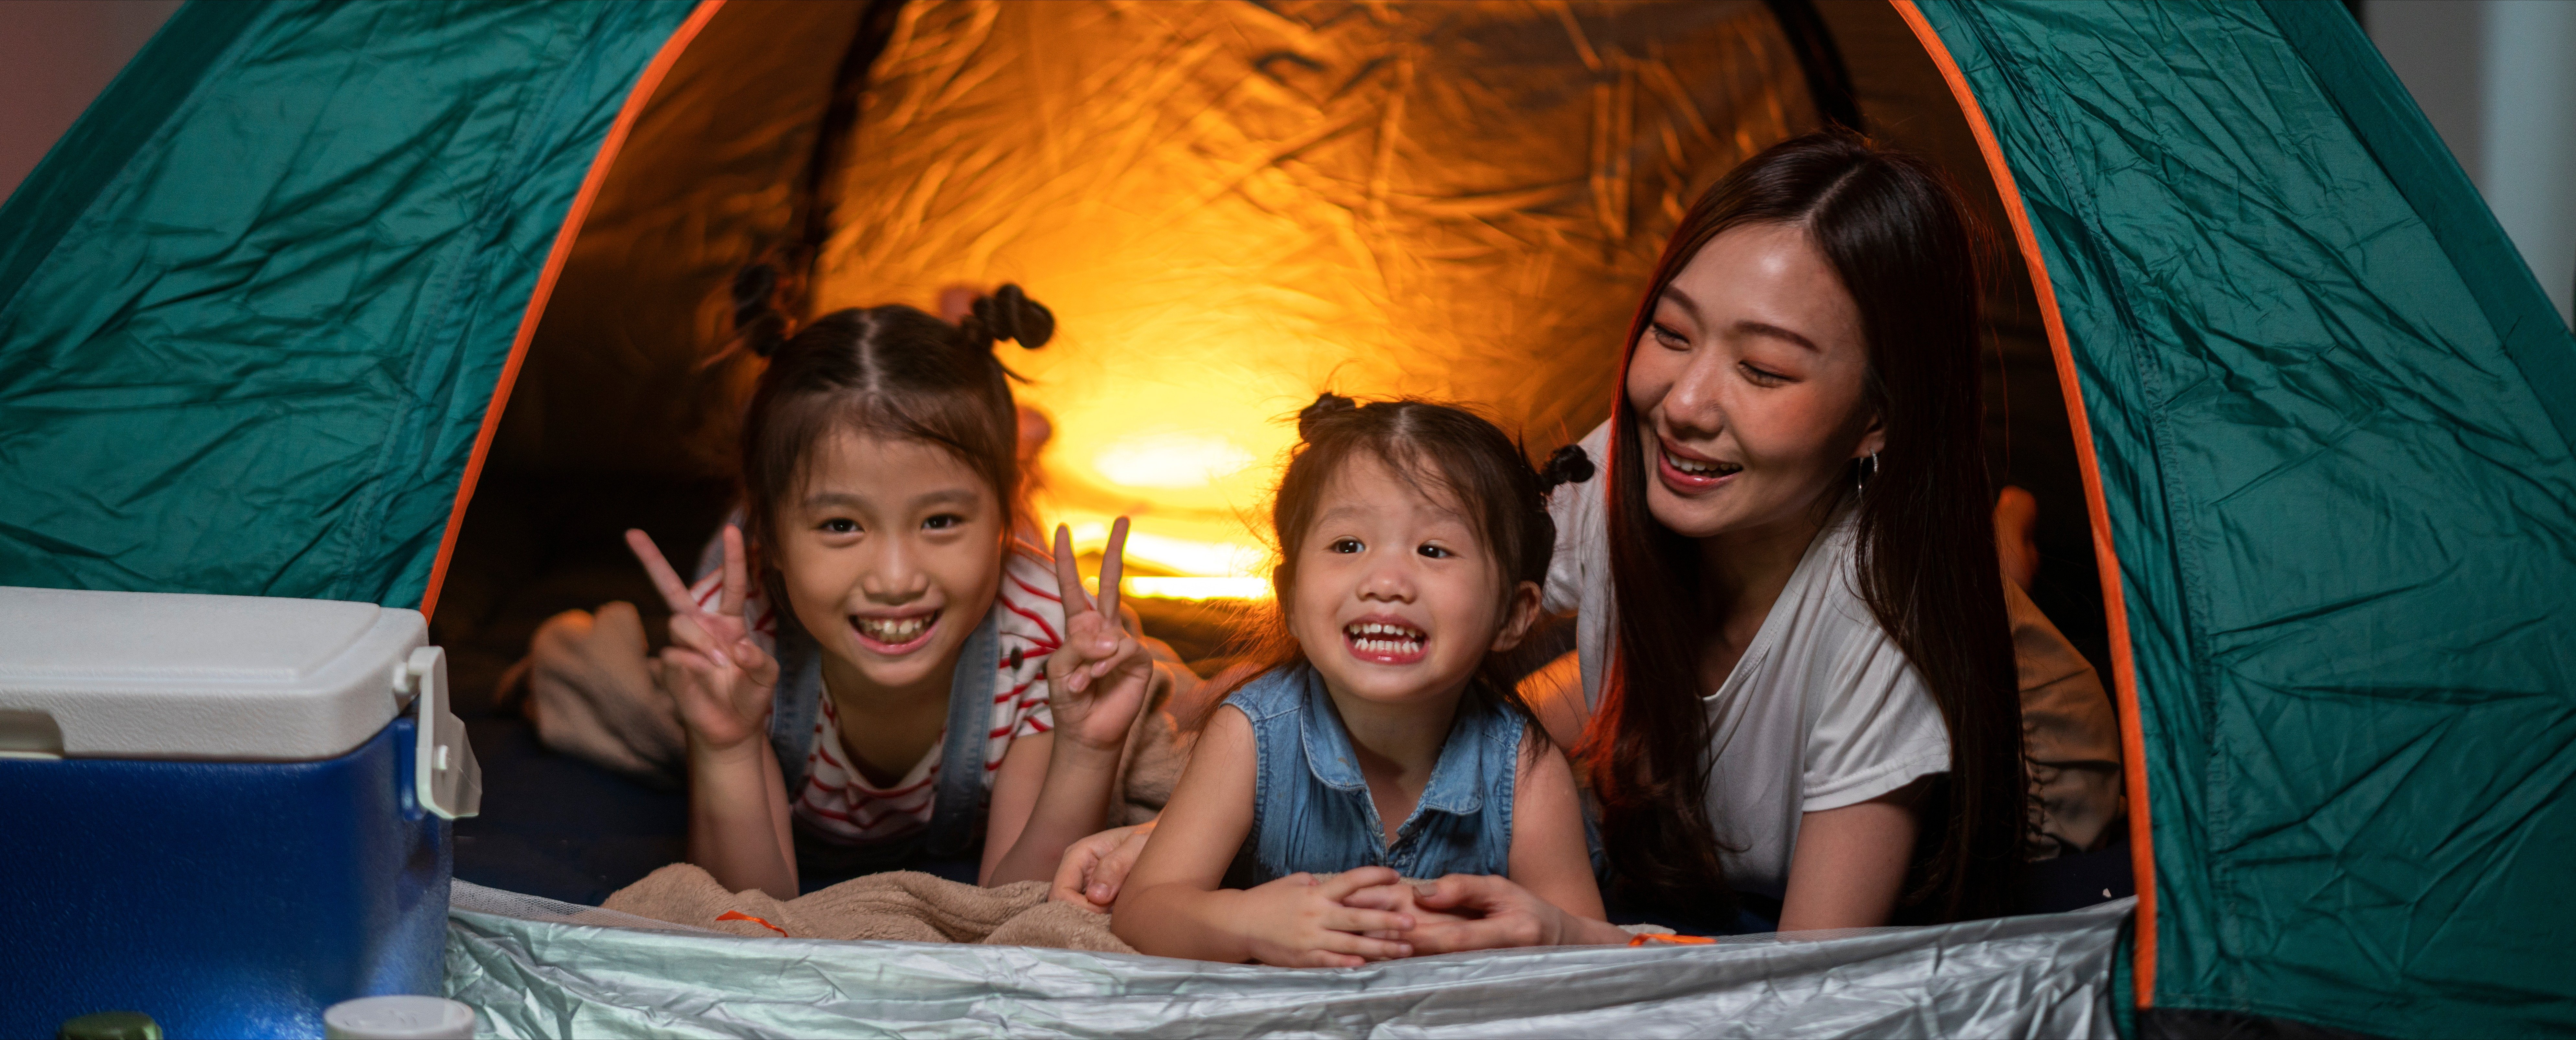 Asian woman playing and staying in tent with her daughter and having fun with camping tent in their bedroom 